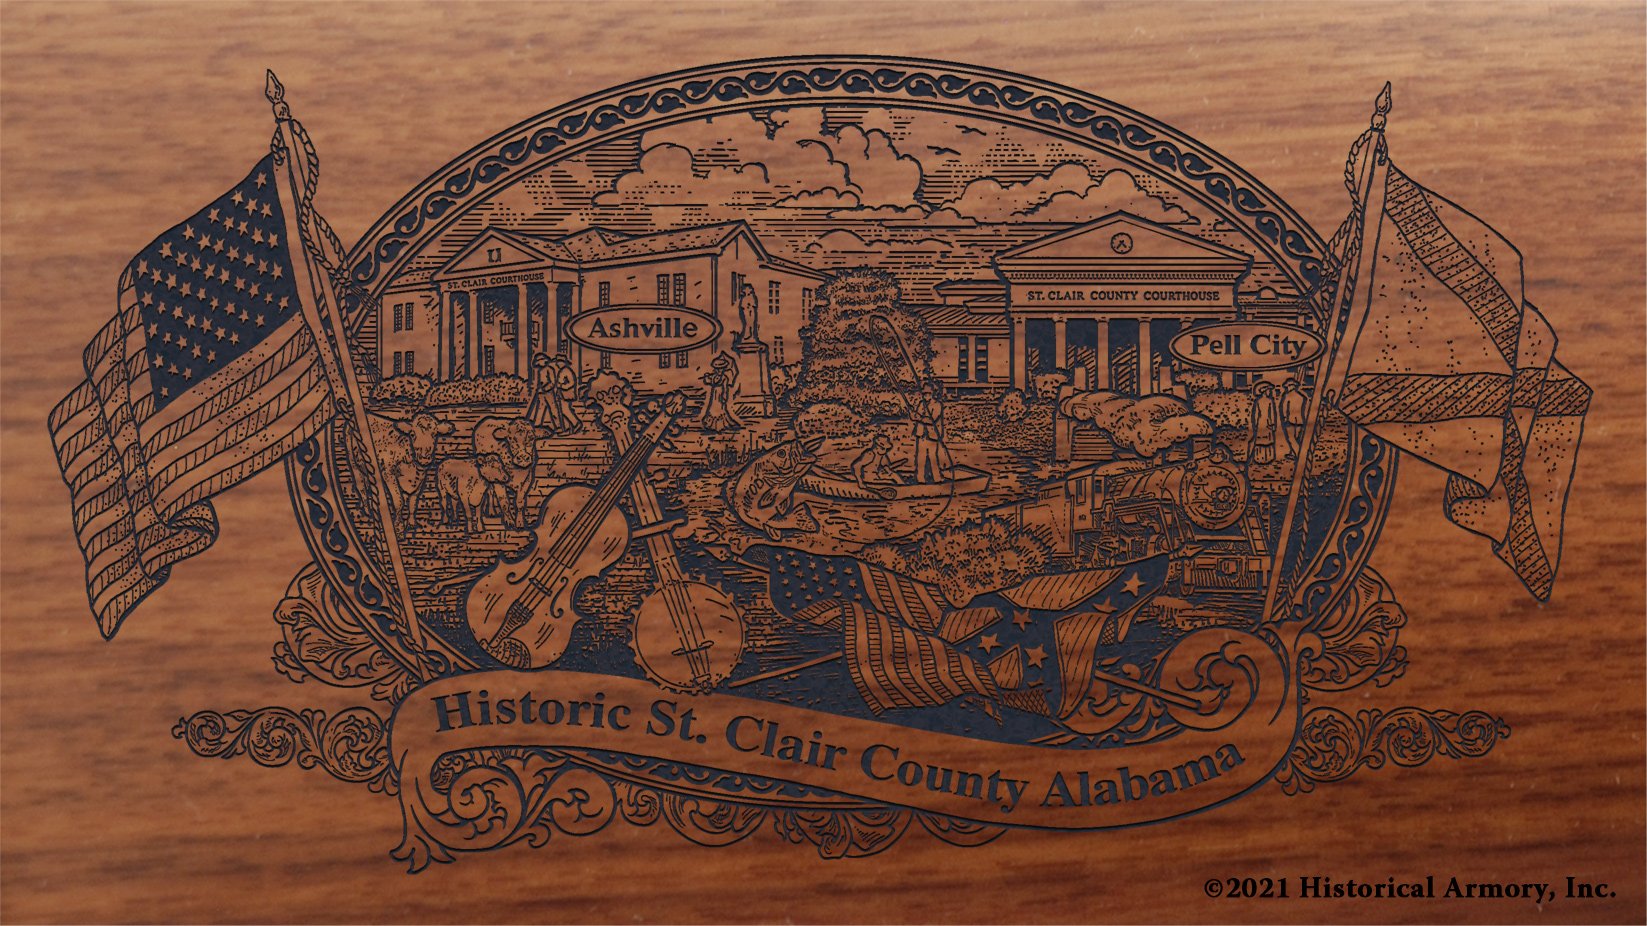 Engraved artwork | History of St. Clair County Alabama | Historical Armory